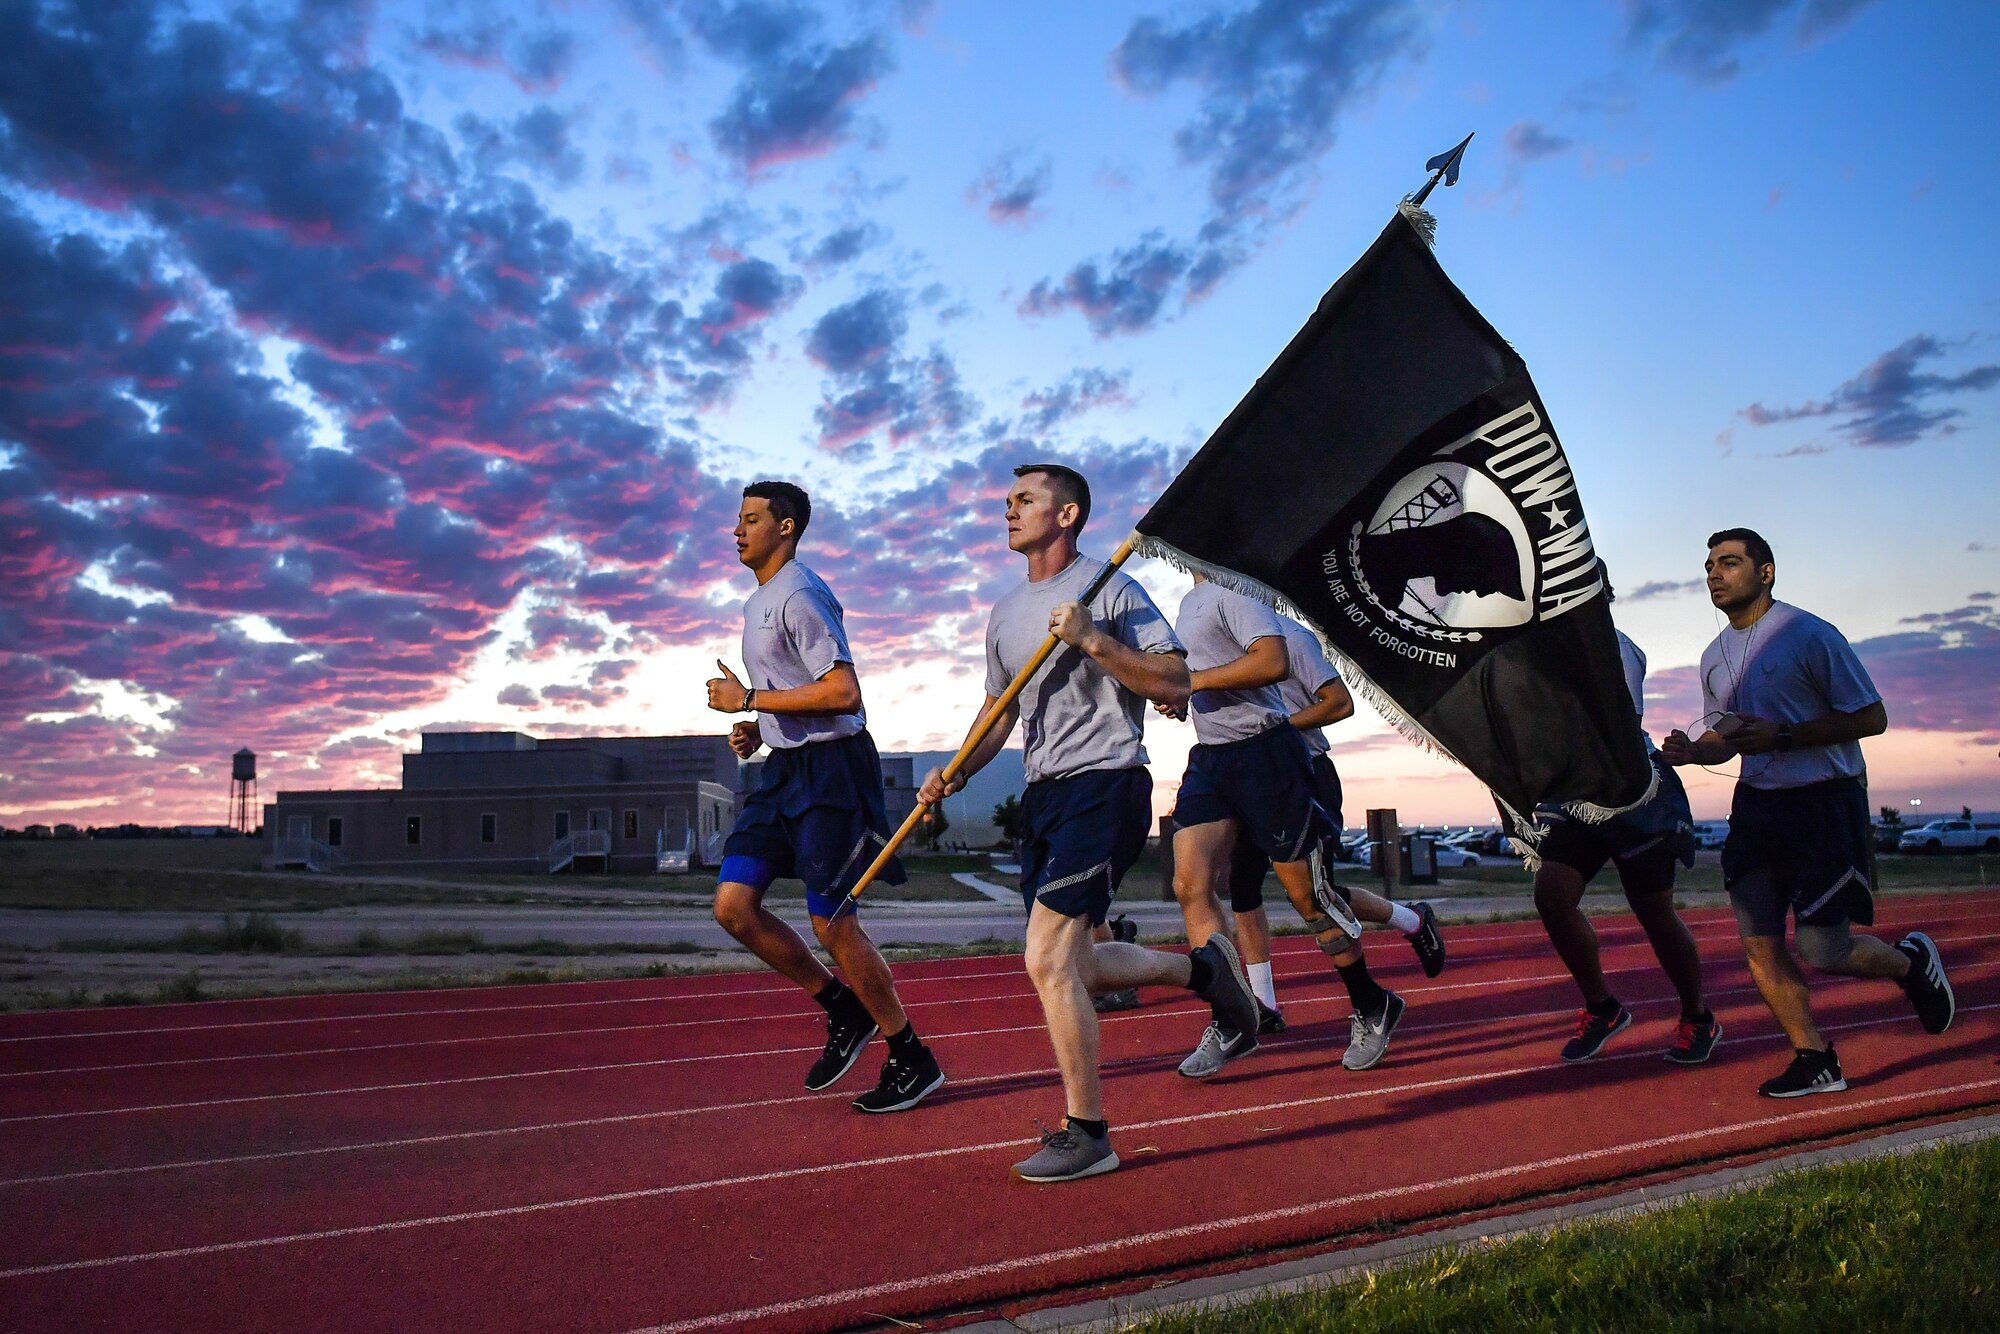 Airmen run with the POW/MIA flag in the early morning hours during a 24-hour run at Schriever Air Force Base, Colo., Sept. 19, 2018. Airmen from various squadrons continuously ran with the POW/MIA flag in 30 minute intervals, with more than 70 participants carrying the flag for a total of 120 miles. (U.S. Air Force photo by Kathryn Calvert)